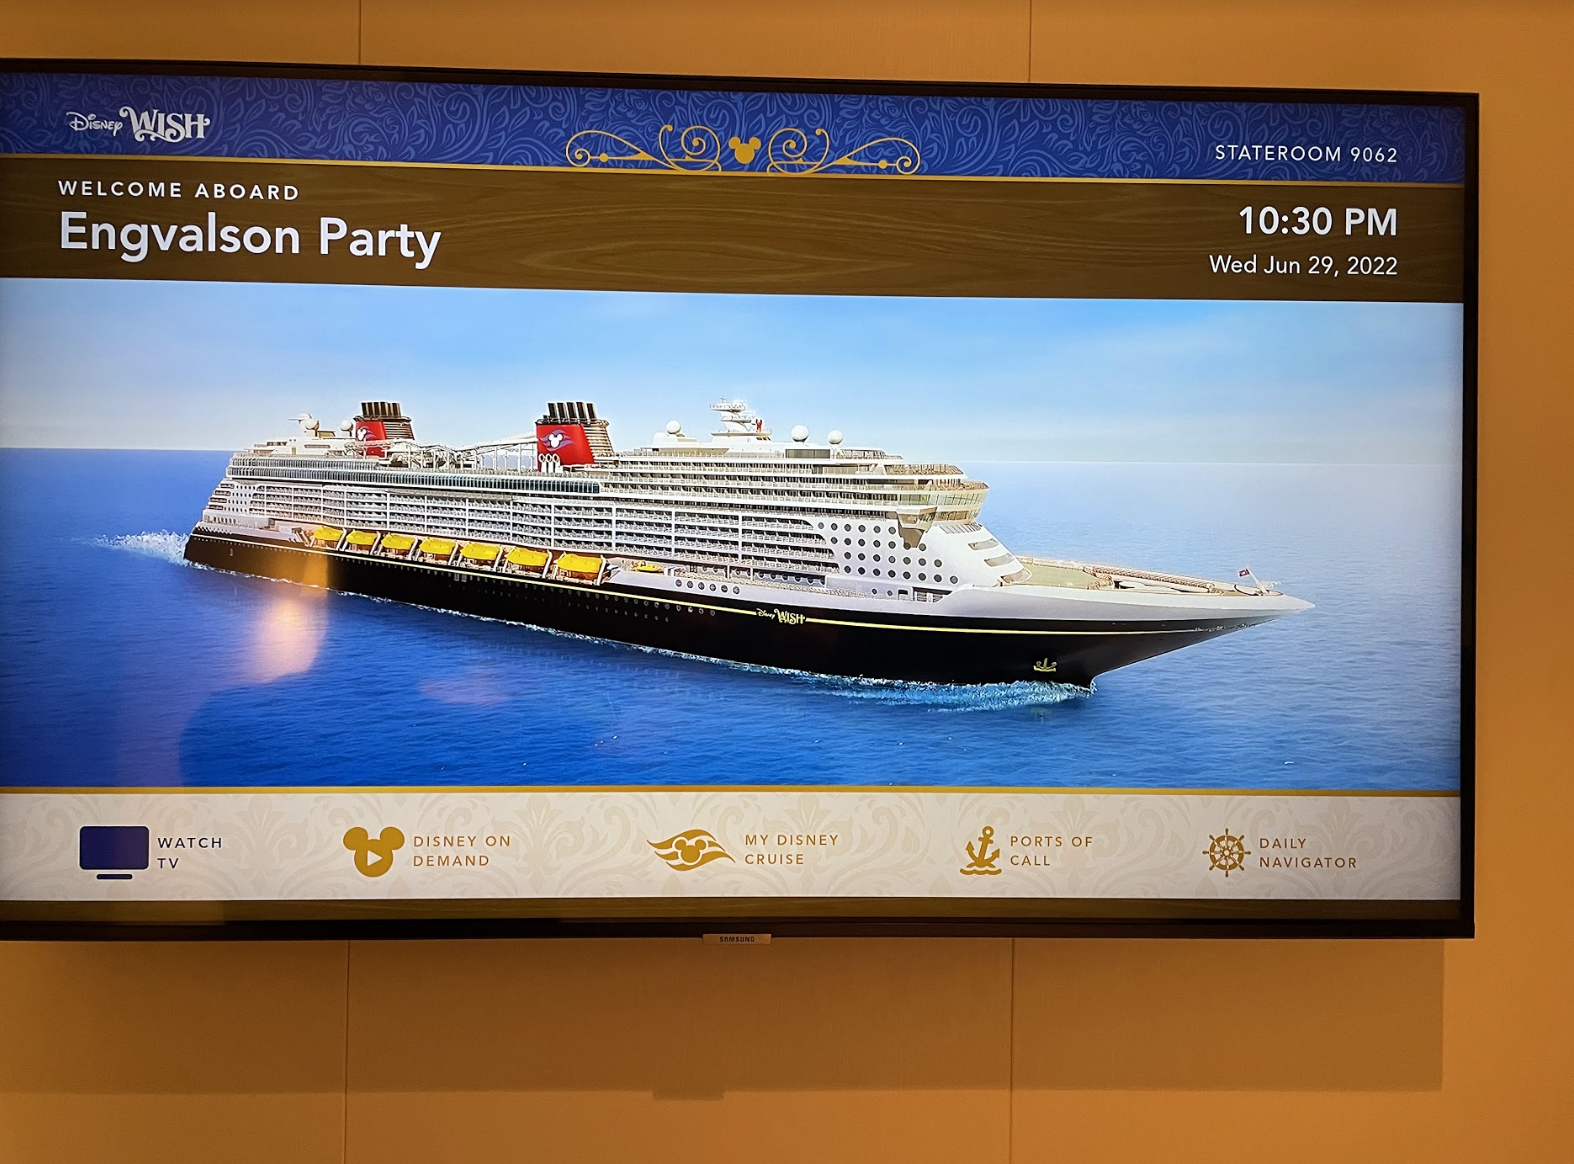 screen with the welcome aboard screen showing the ship